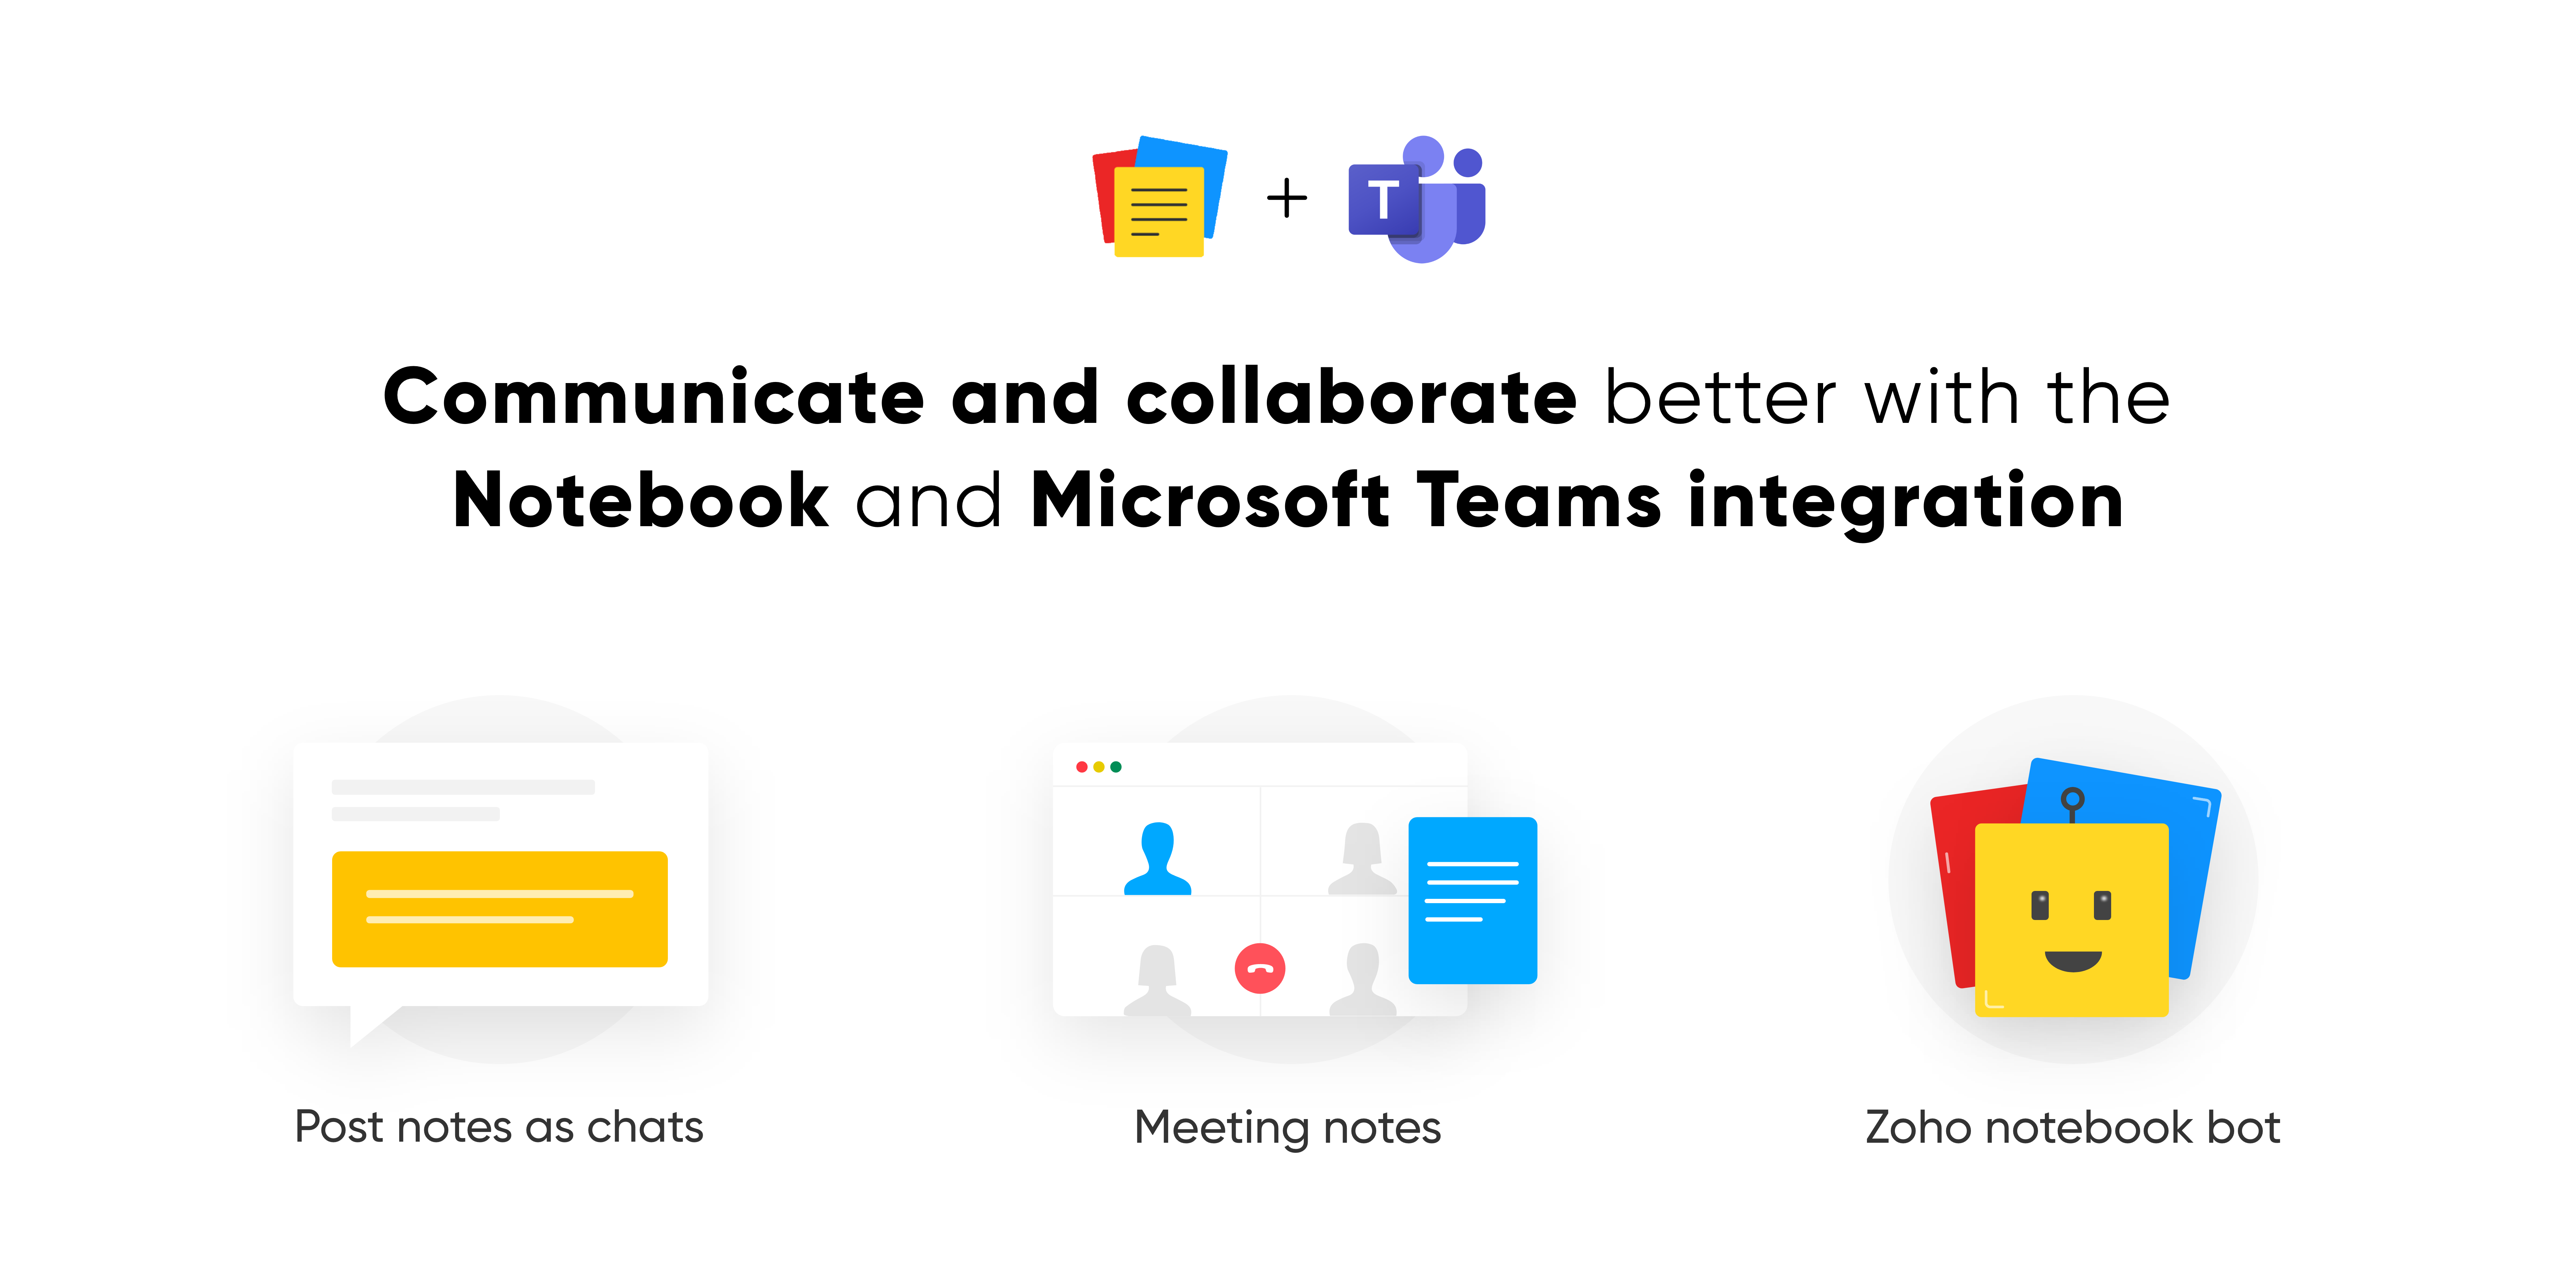 Communicate and collaborate better with the Notebook and Microsoft Teams integration